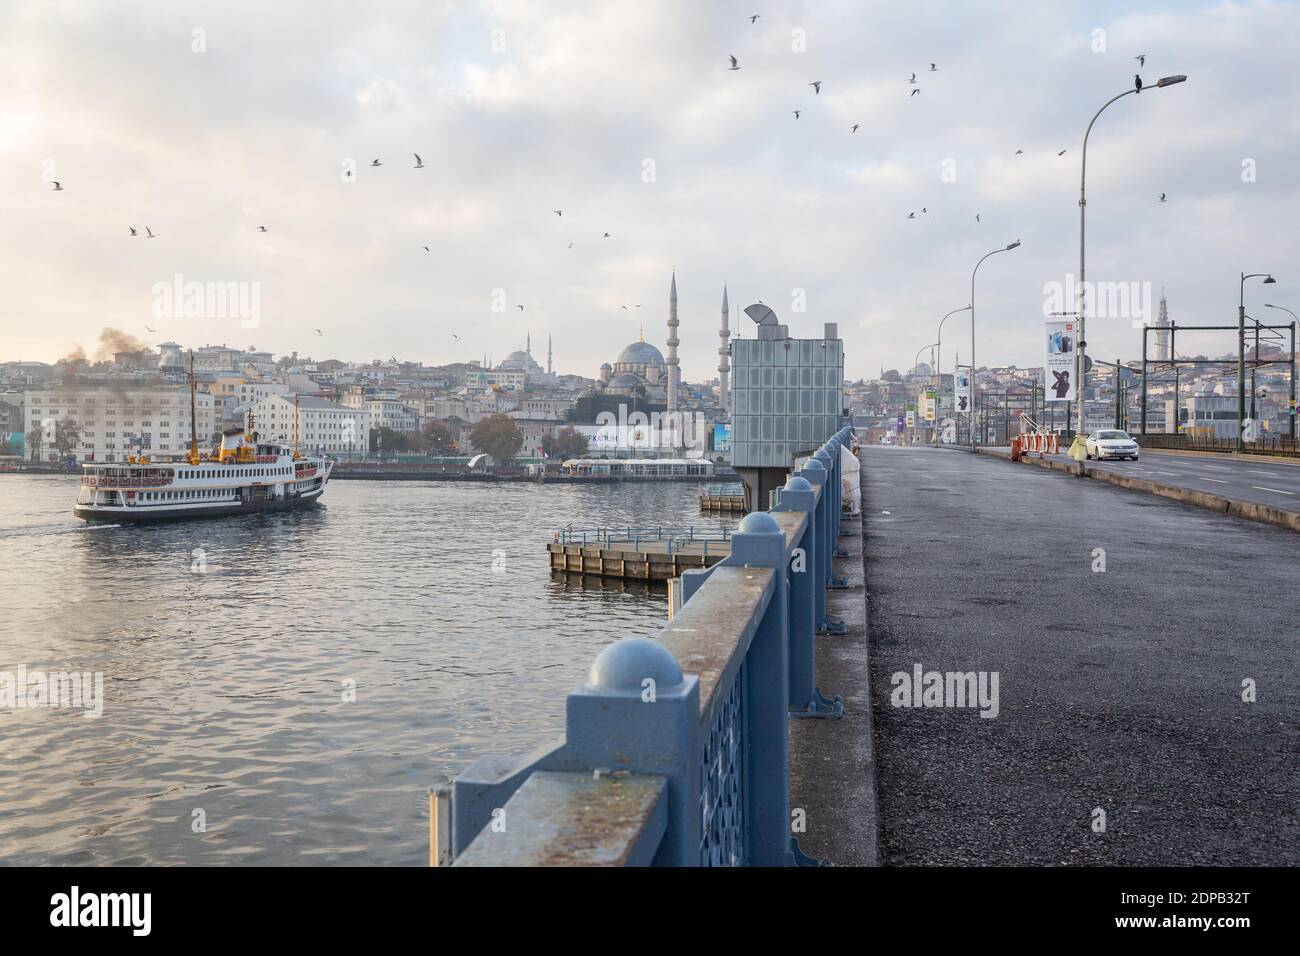 View from Galata Bridge, Istanbul in Turkey on December 6, 2020. The streets of Istanbul, which are empty due to the curfew on the weekend. Stock Photo